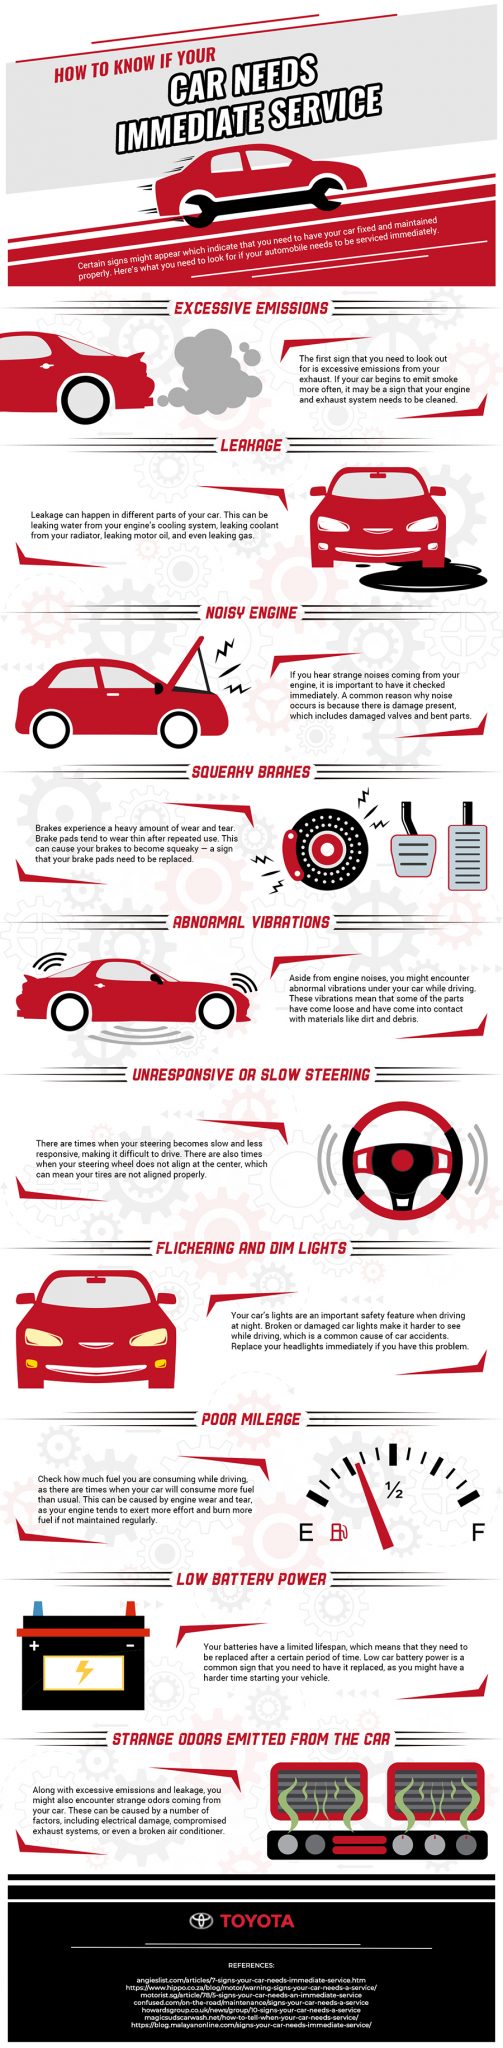 Infog - How to Know If Your Car Needs Immediate Service (1)